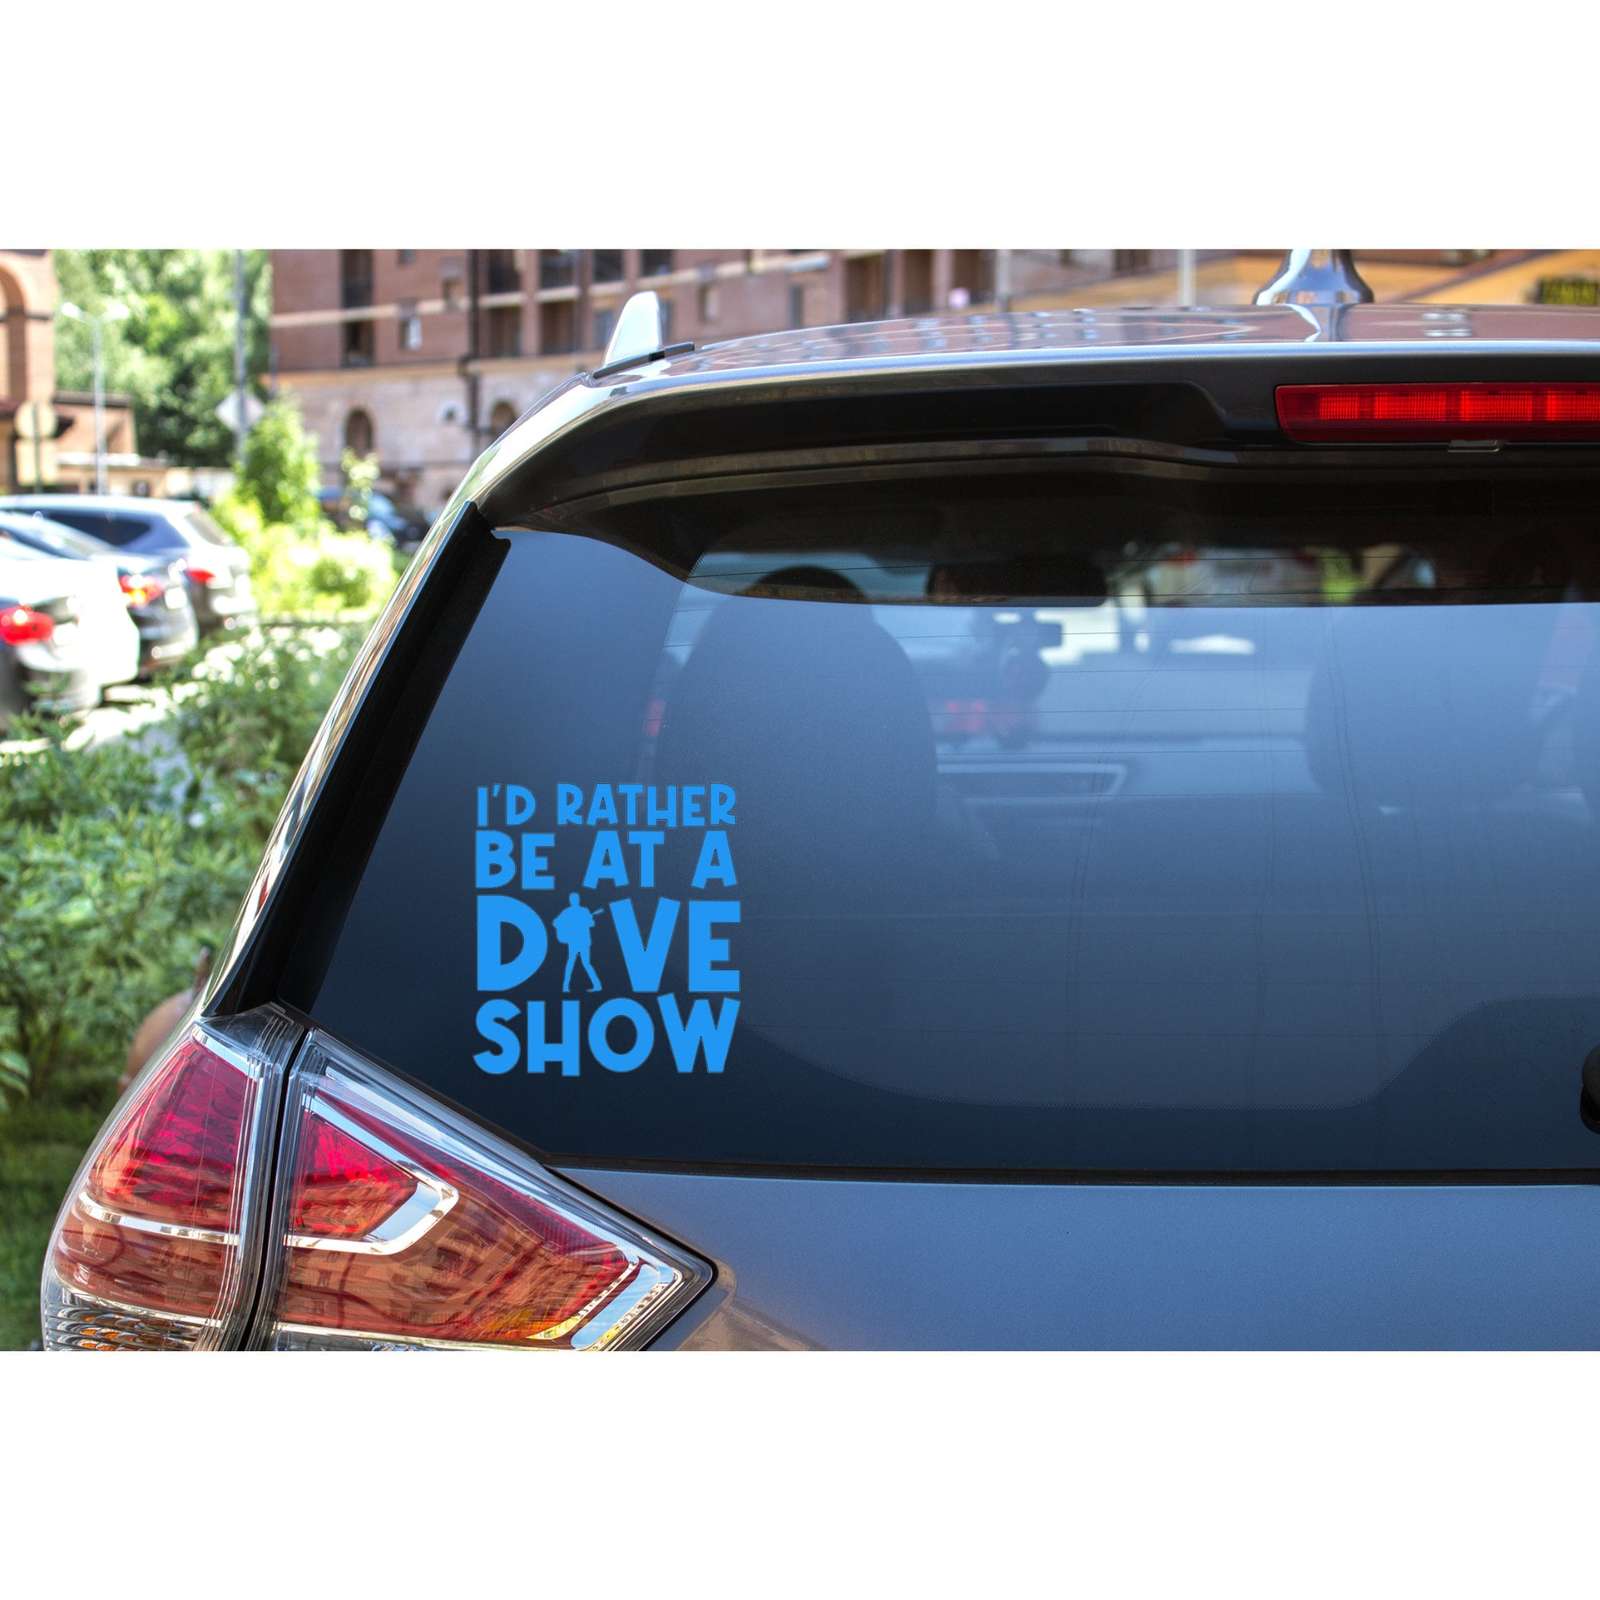 Primary image for I'd Rather Be at a Dave Show | Dave Matthews Band DMB | Vinyl Decal Sticker Car 